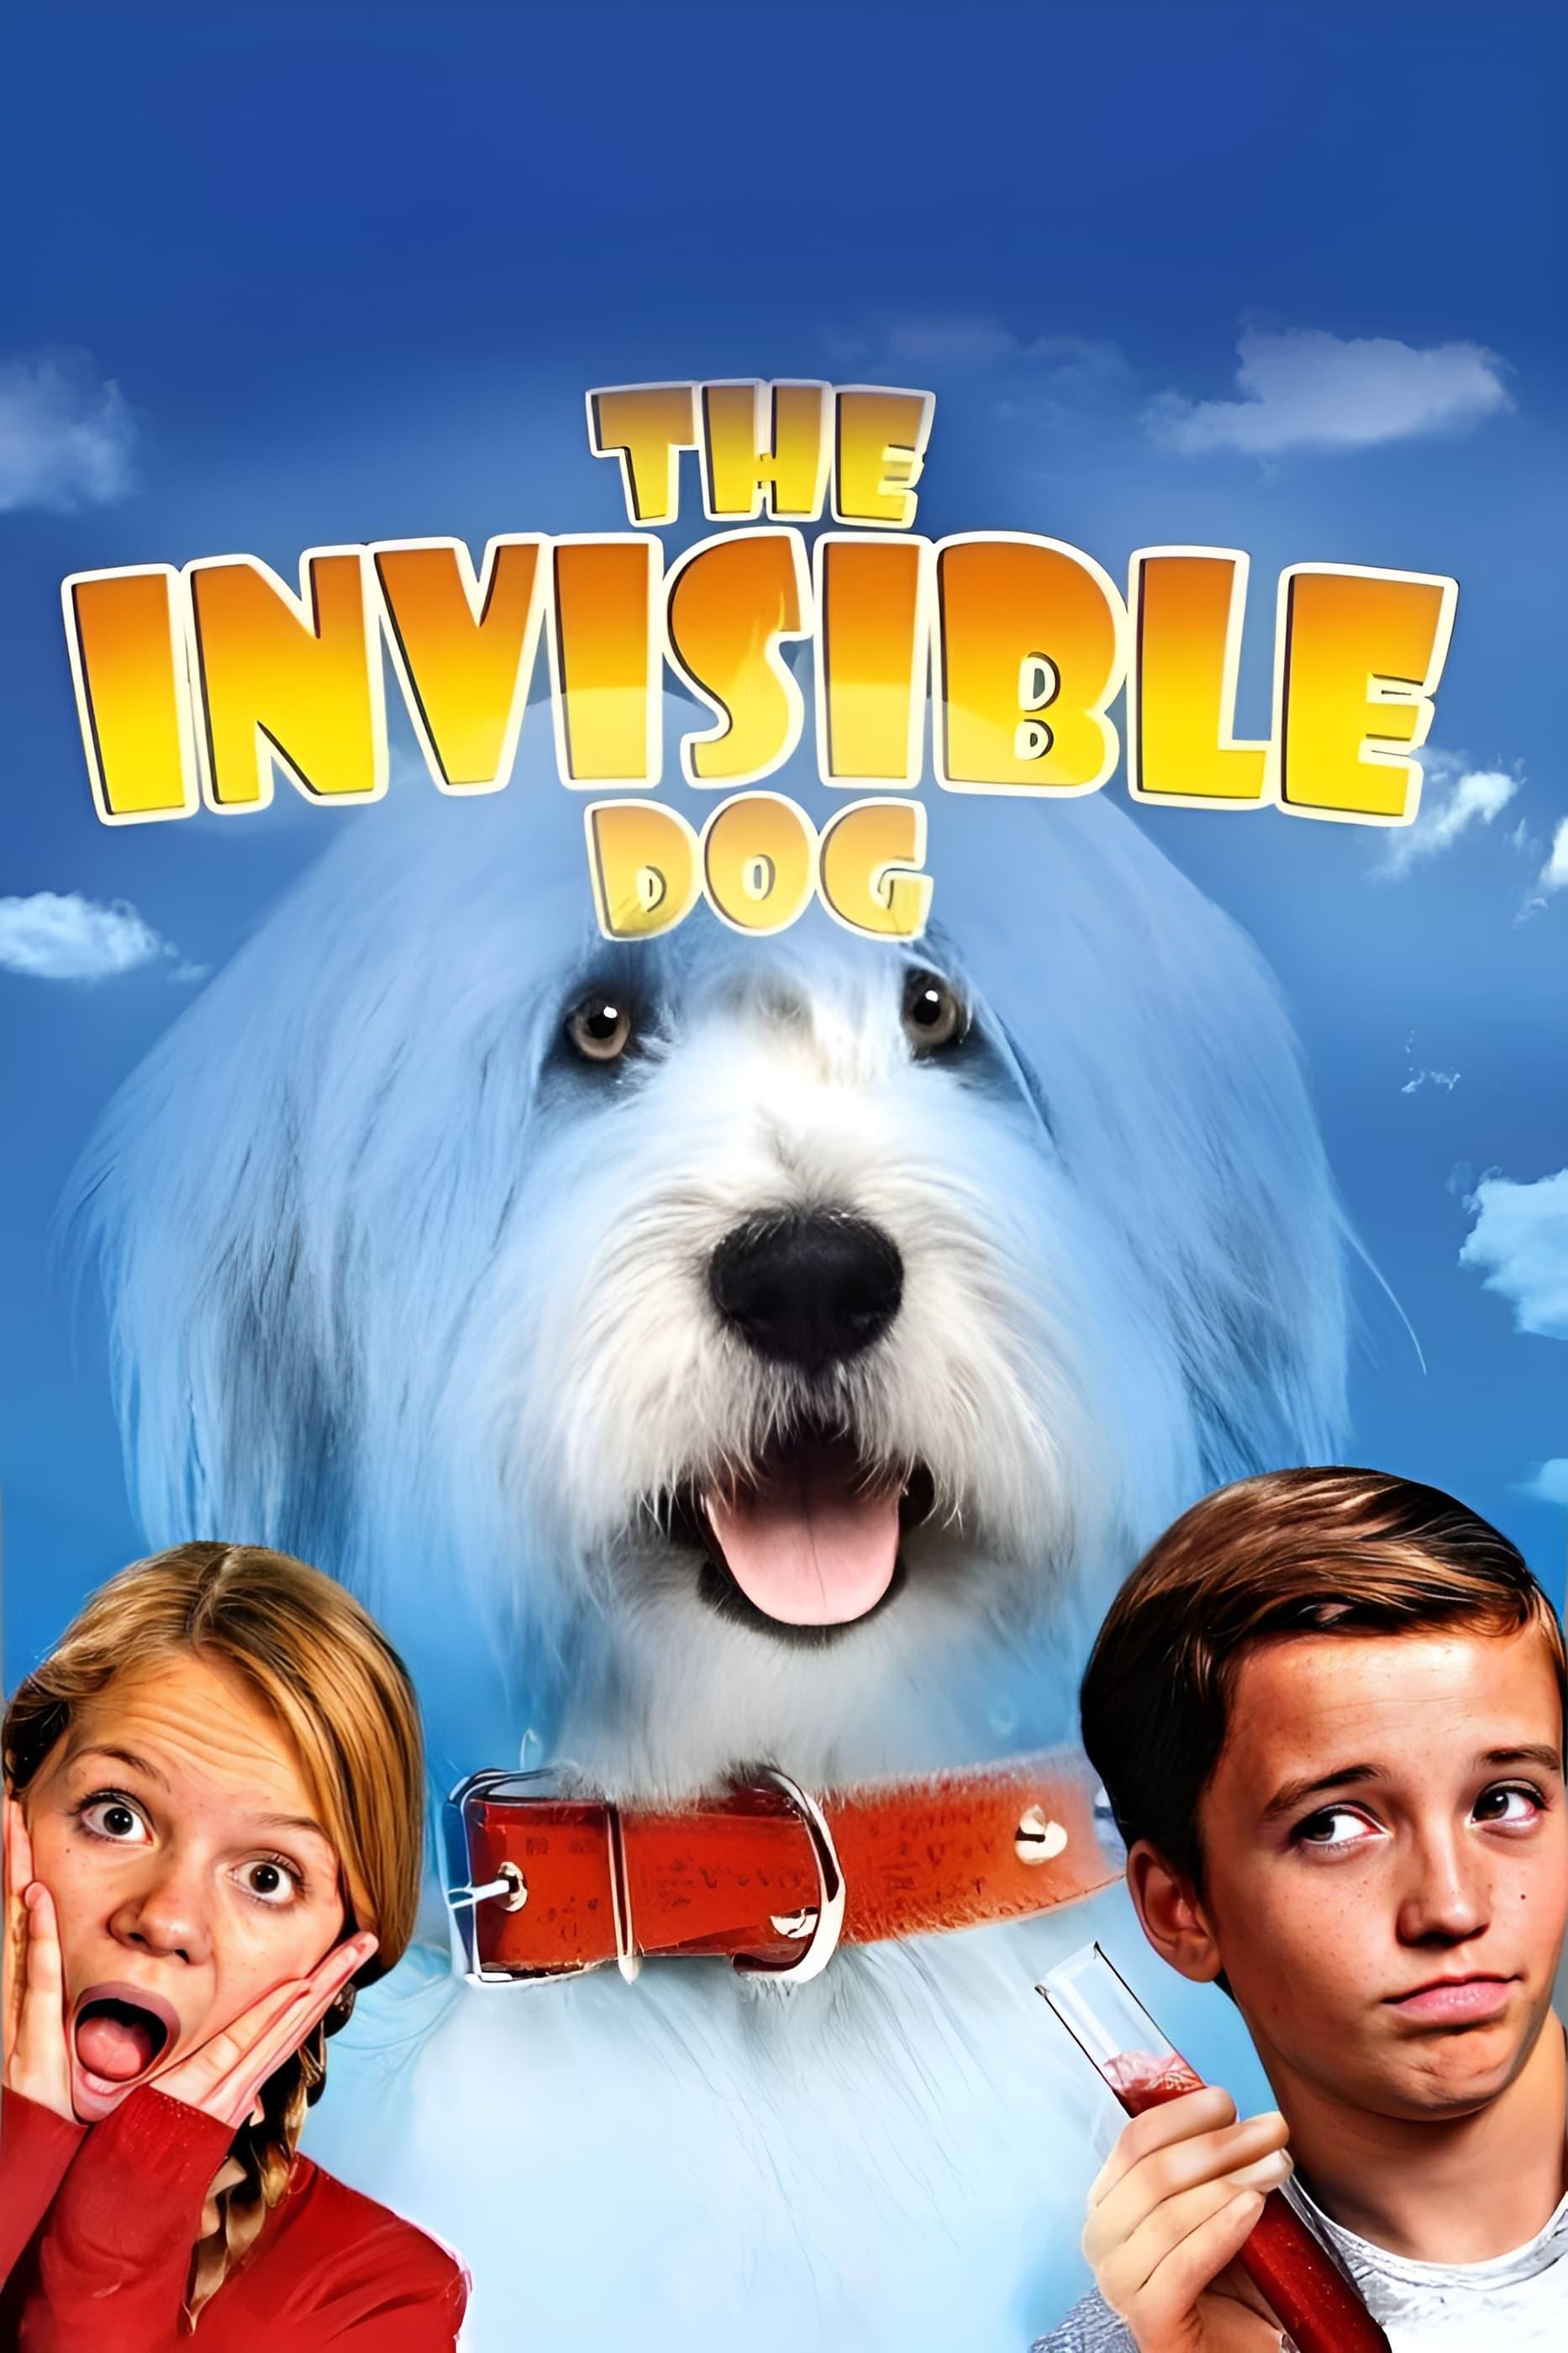 Abner, the Invisible Dog poster